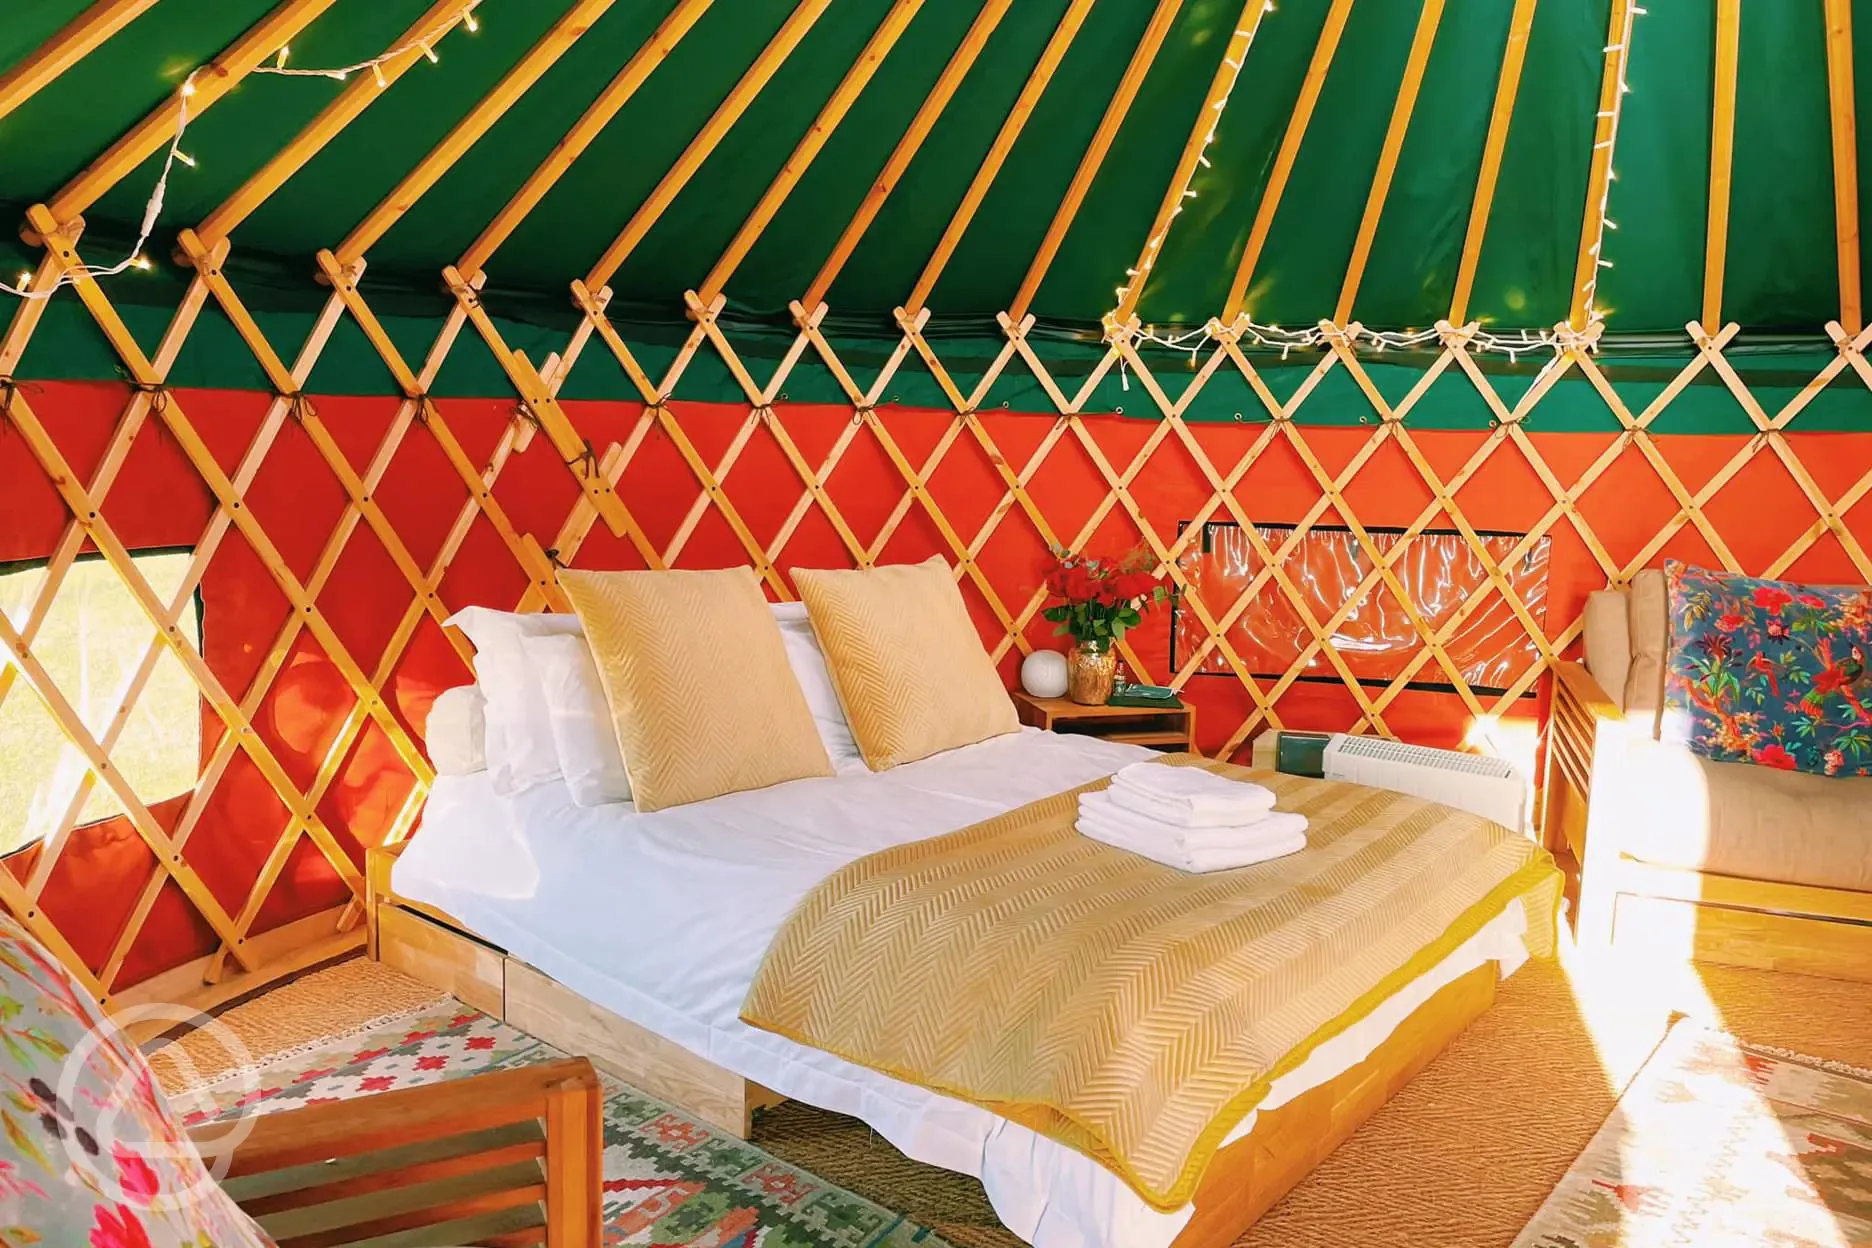 Bed in yurts